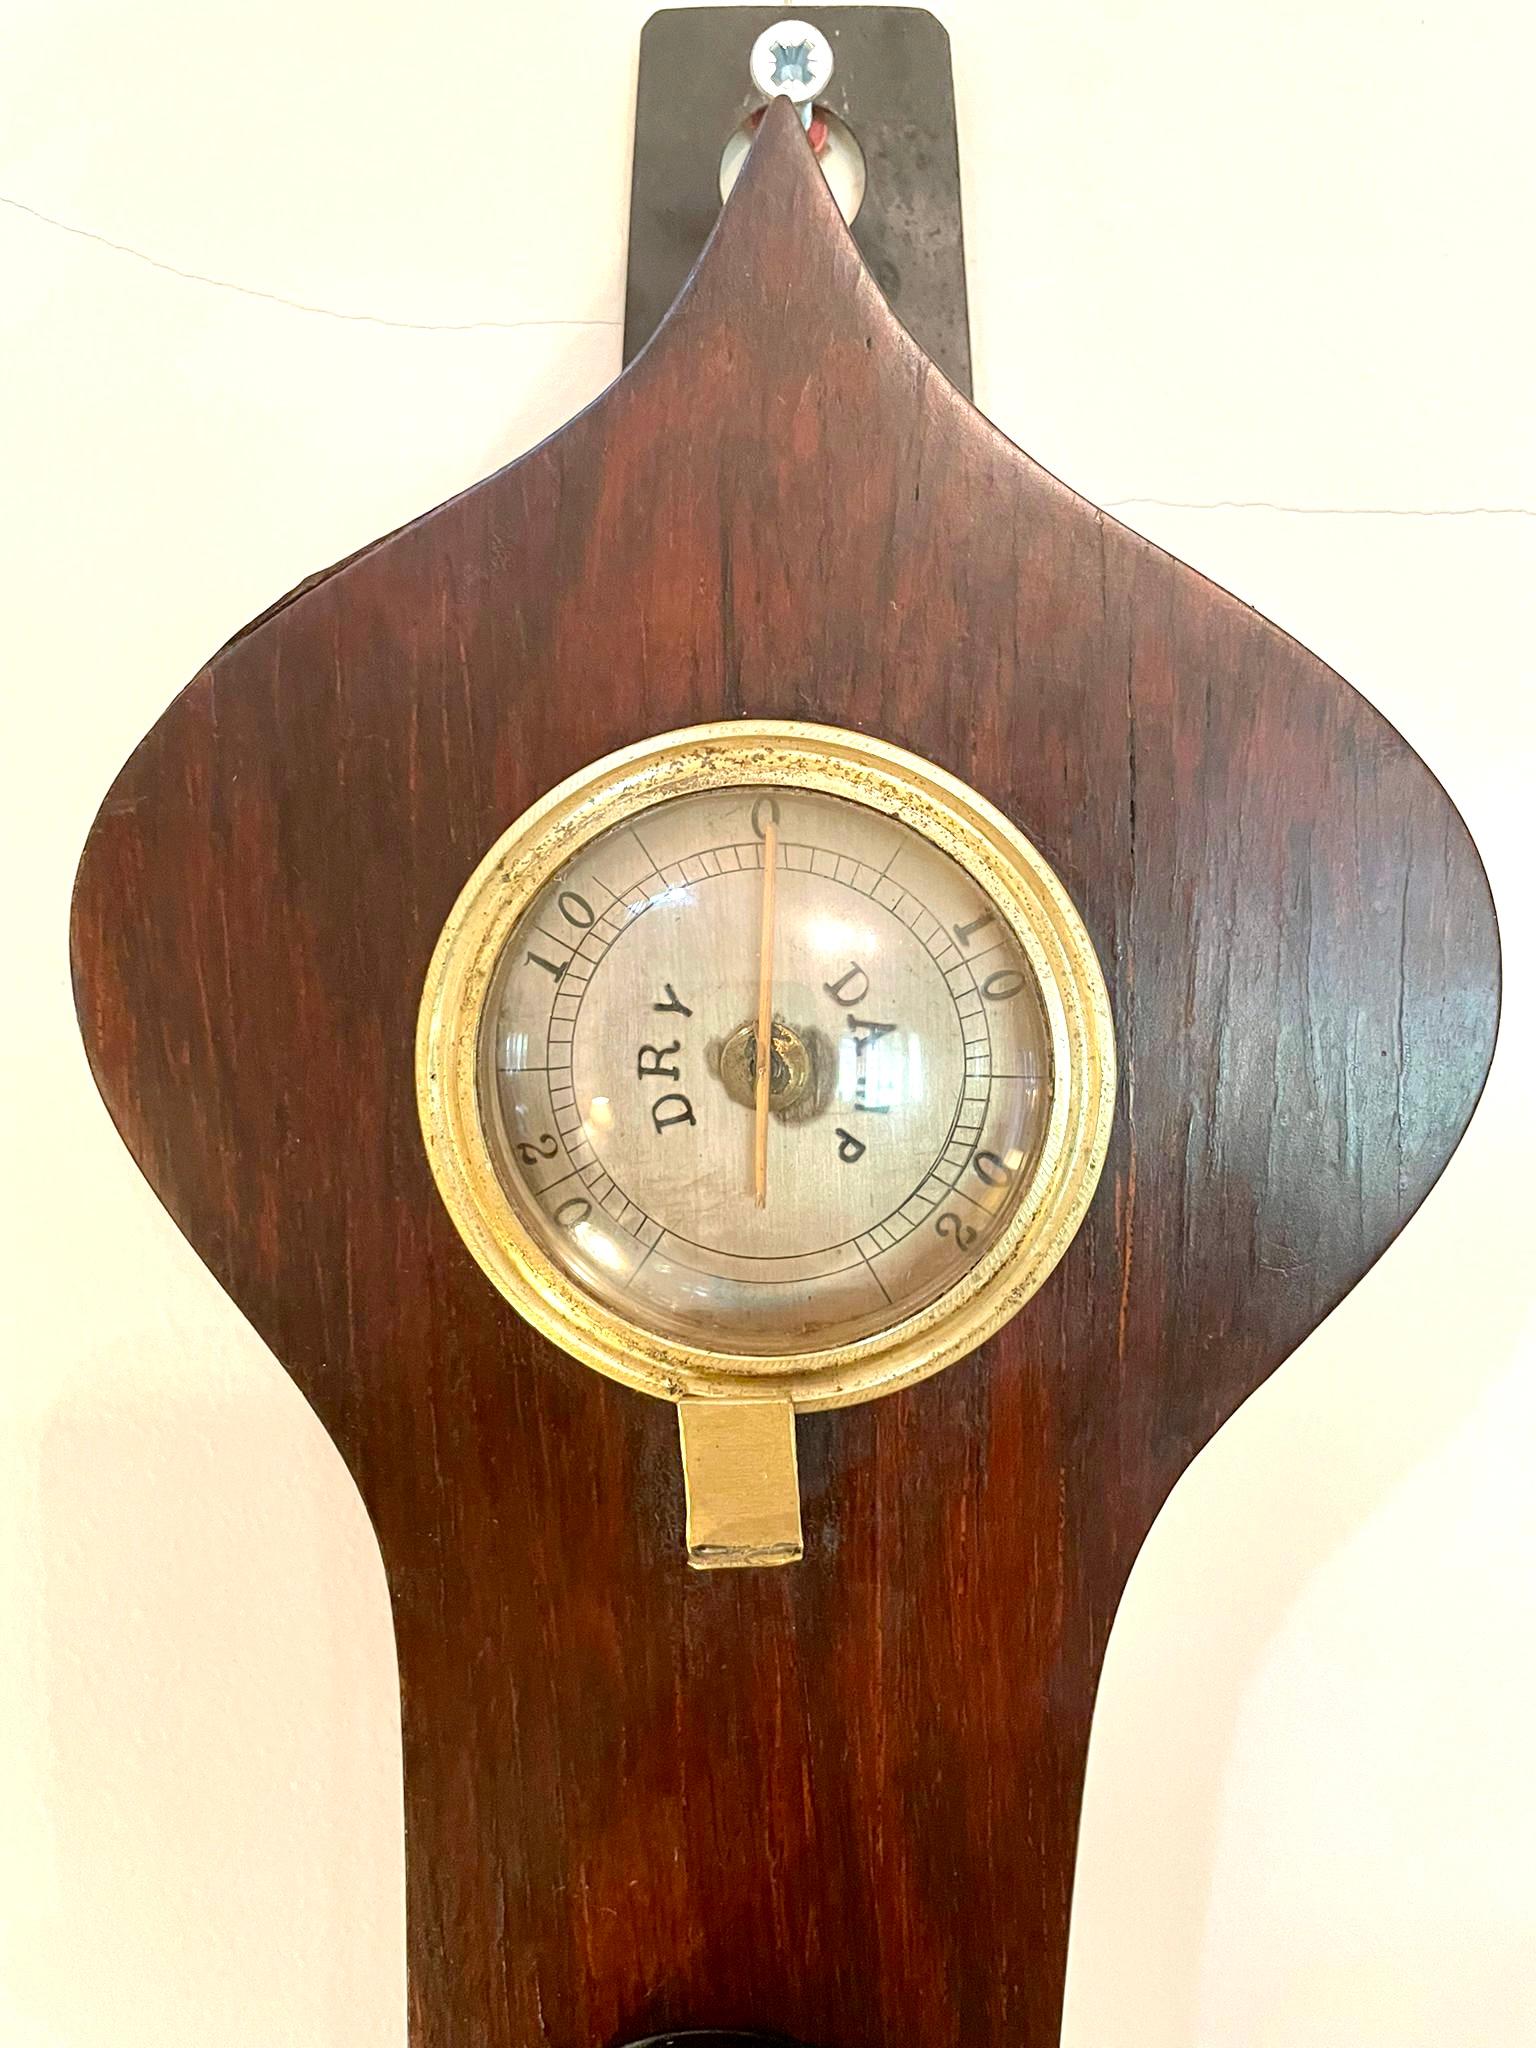 Antique 19th century rosewood banjo barometer having a quality rosewood case with a onion shaped top, nine inch silvered dial with original hands and thermometer, fitted hygrometer, glass fronted spirit level and a bone setting disc.

In lovely